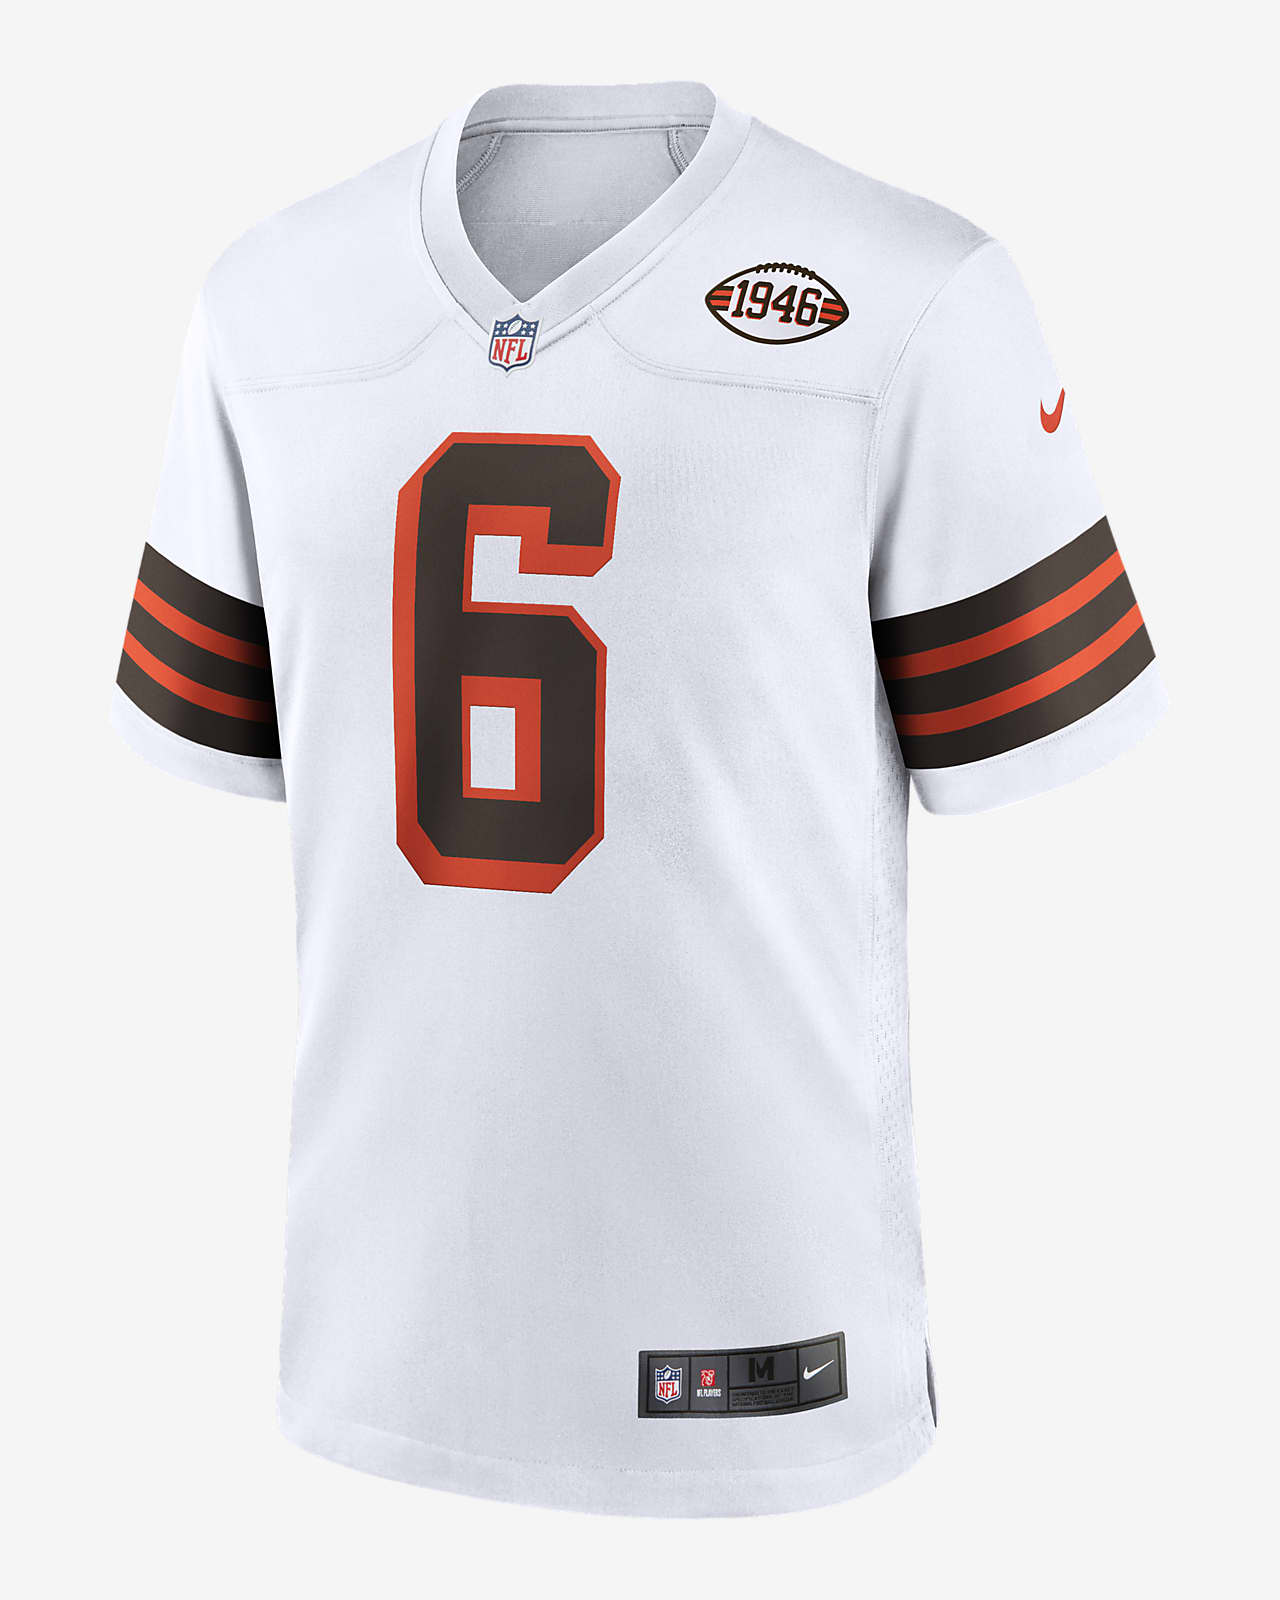 jersey browns